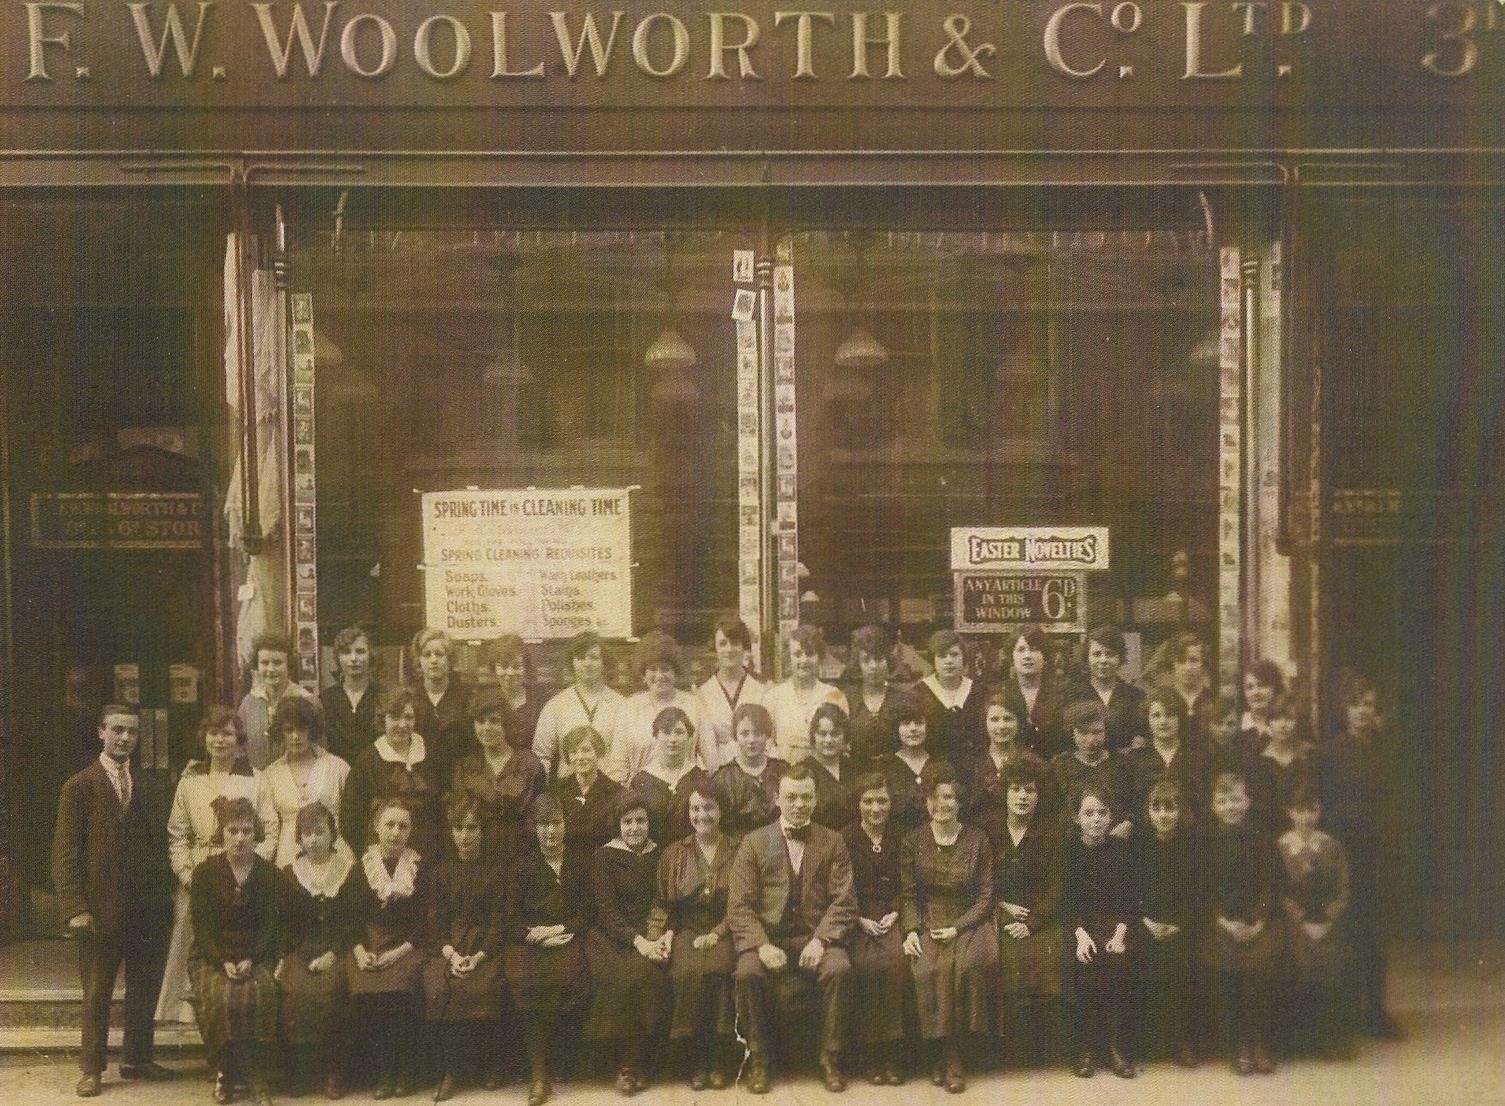 The Chatham Woolworths of 1921, with its full staff complement